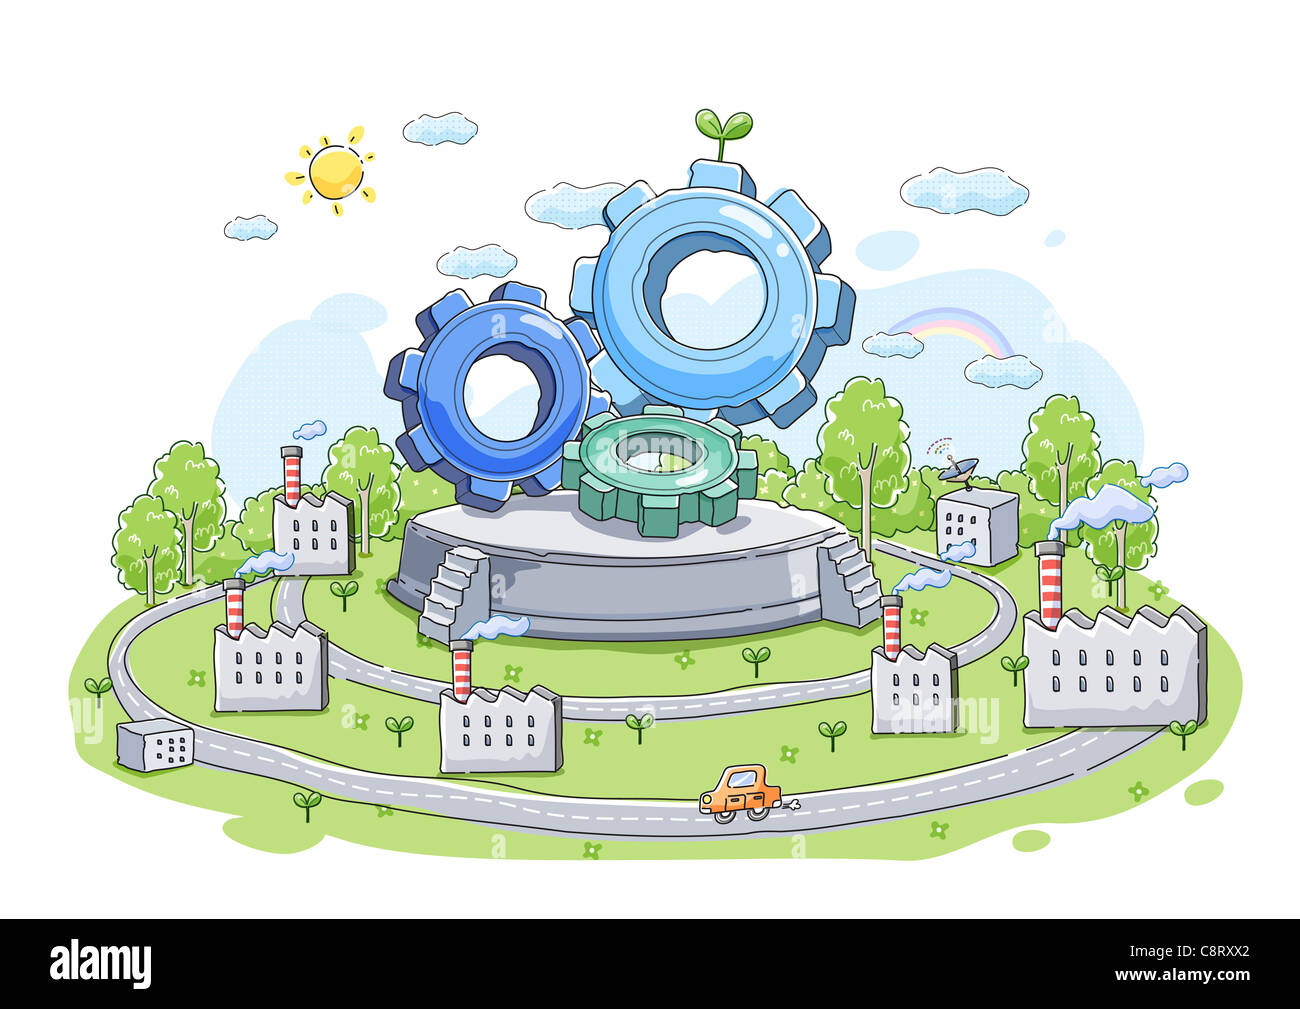 Illustration of gears with factory and cars in background Stock Photo